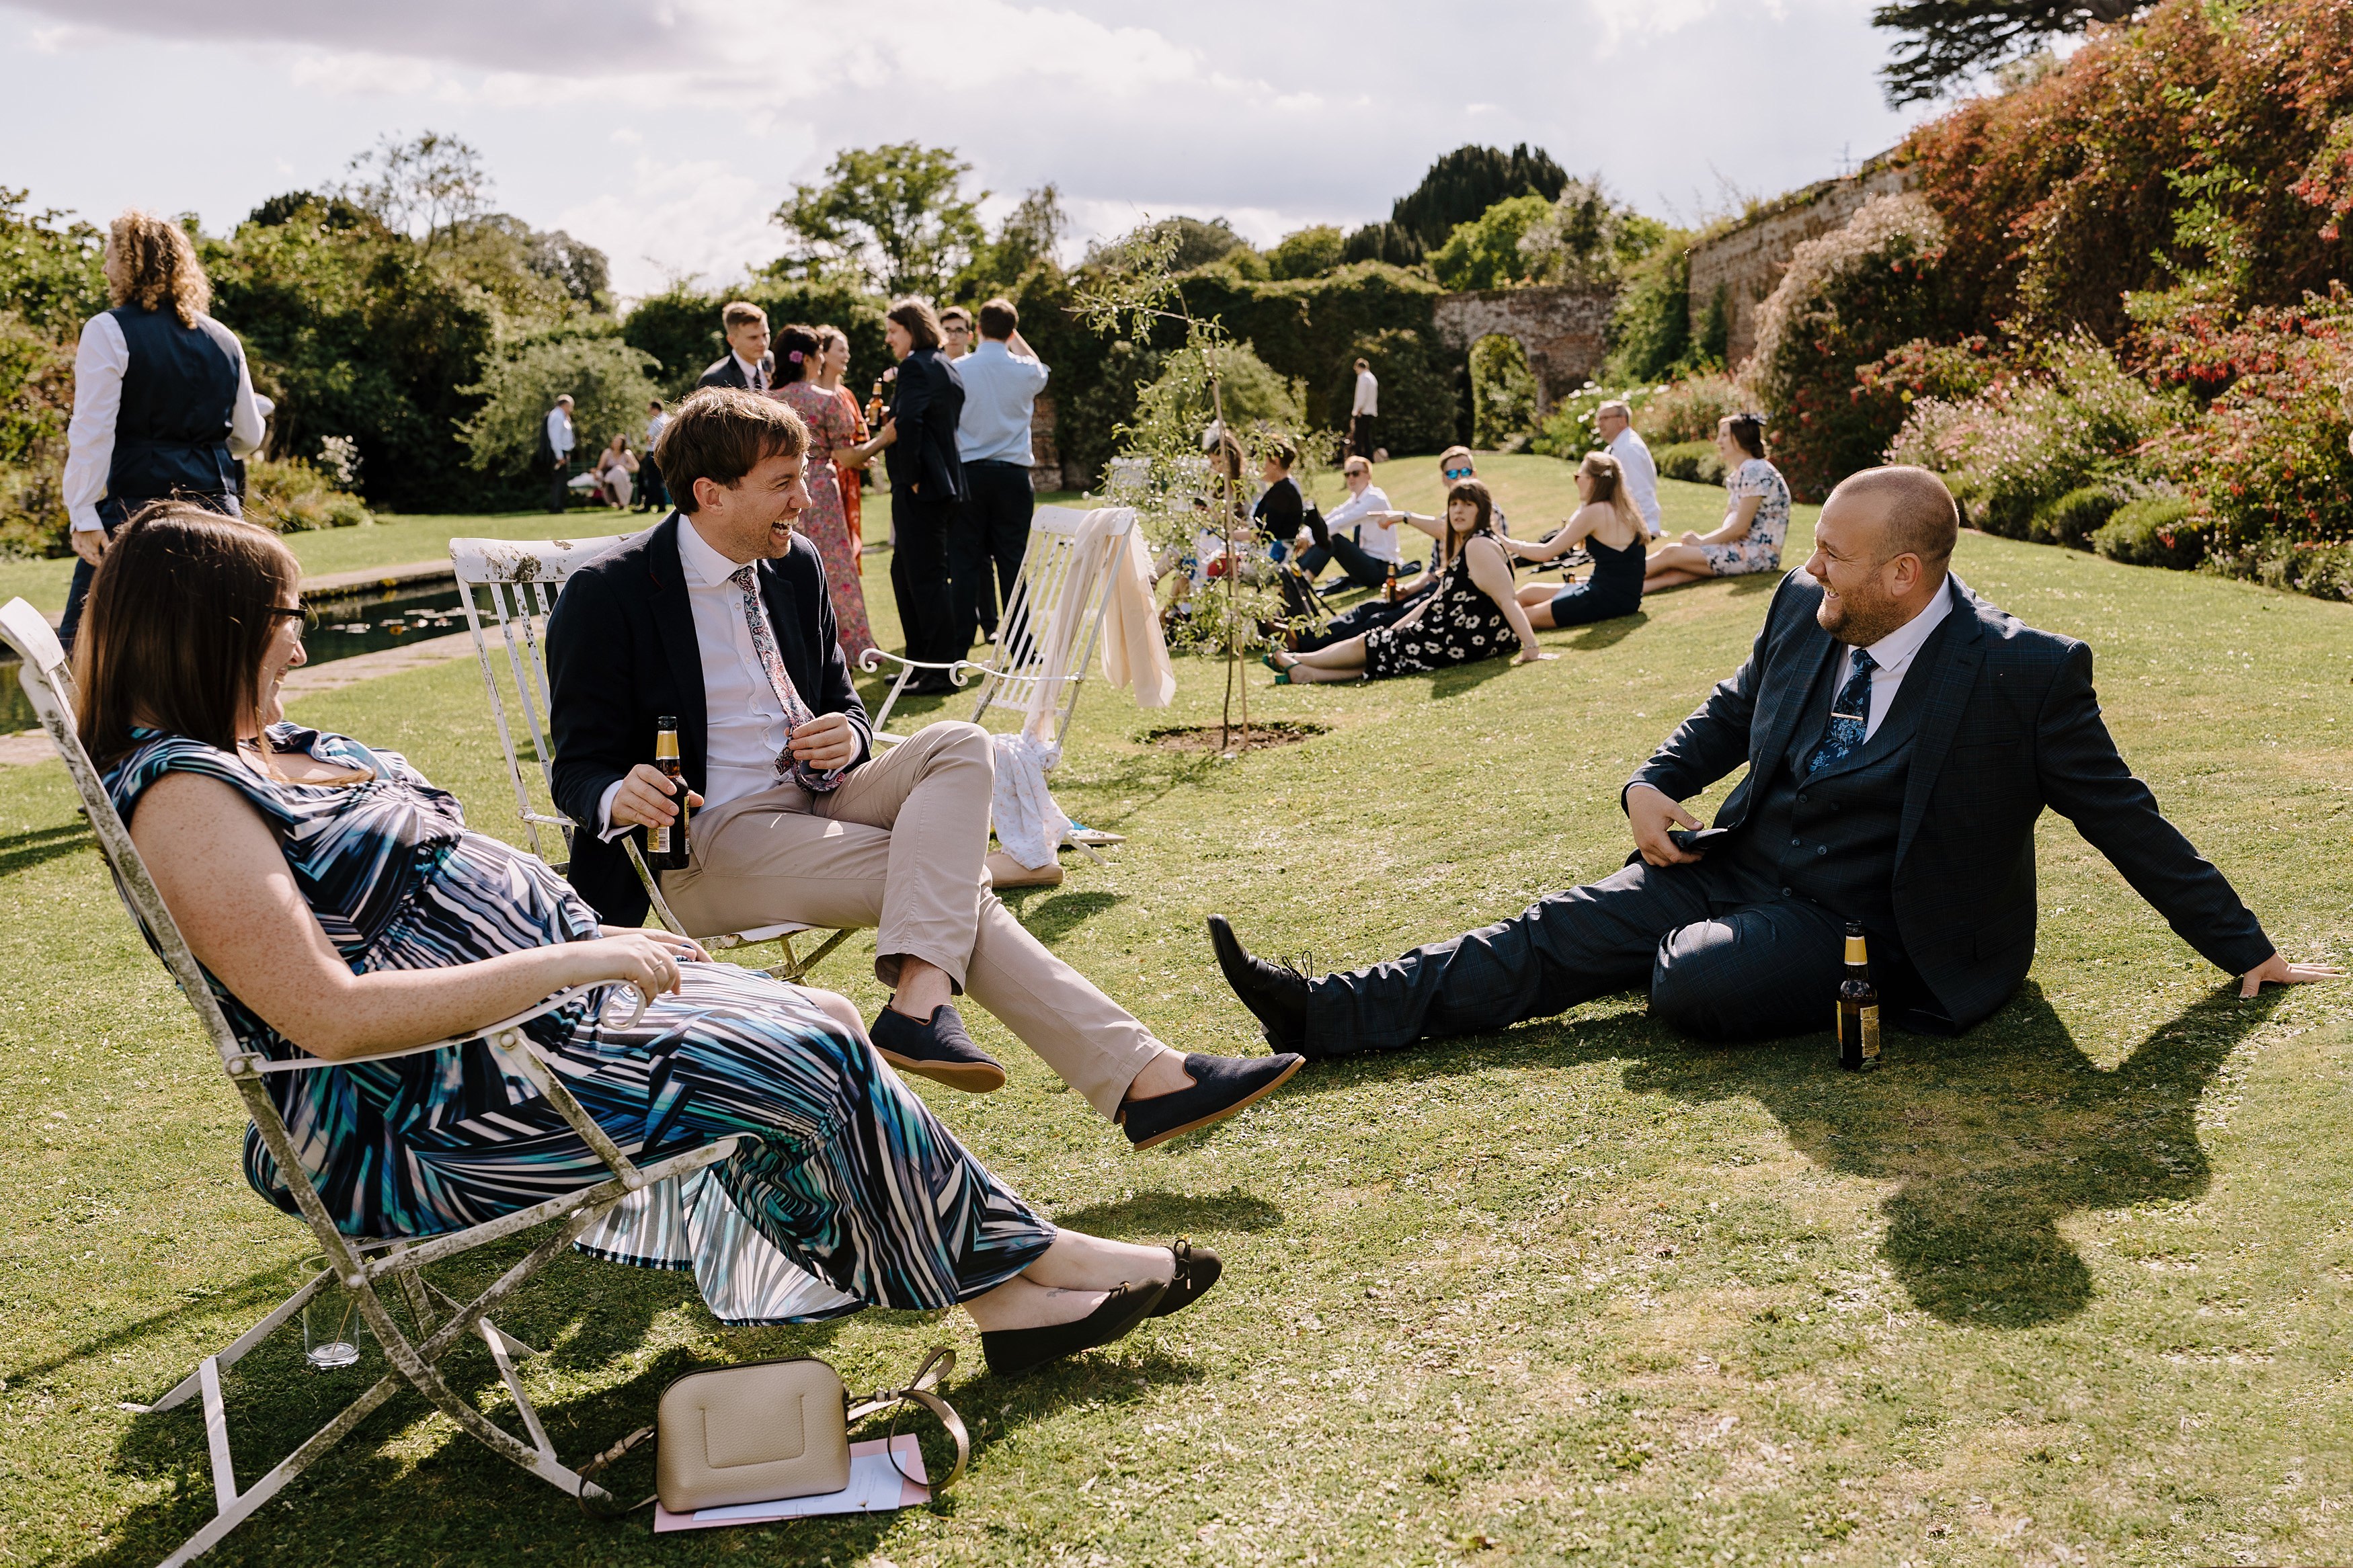 Wedding guests sit on the grass and enjoy drinks in the walled garden at Goodnestone Park